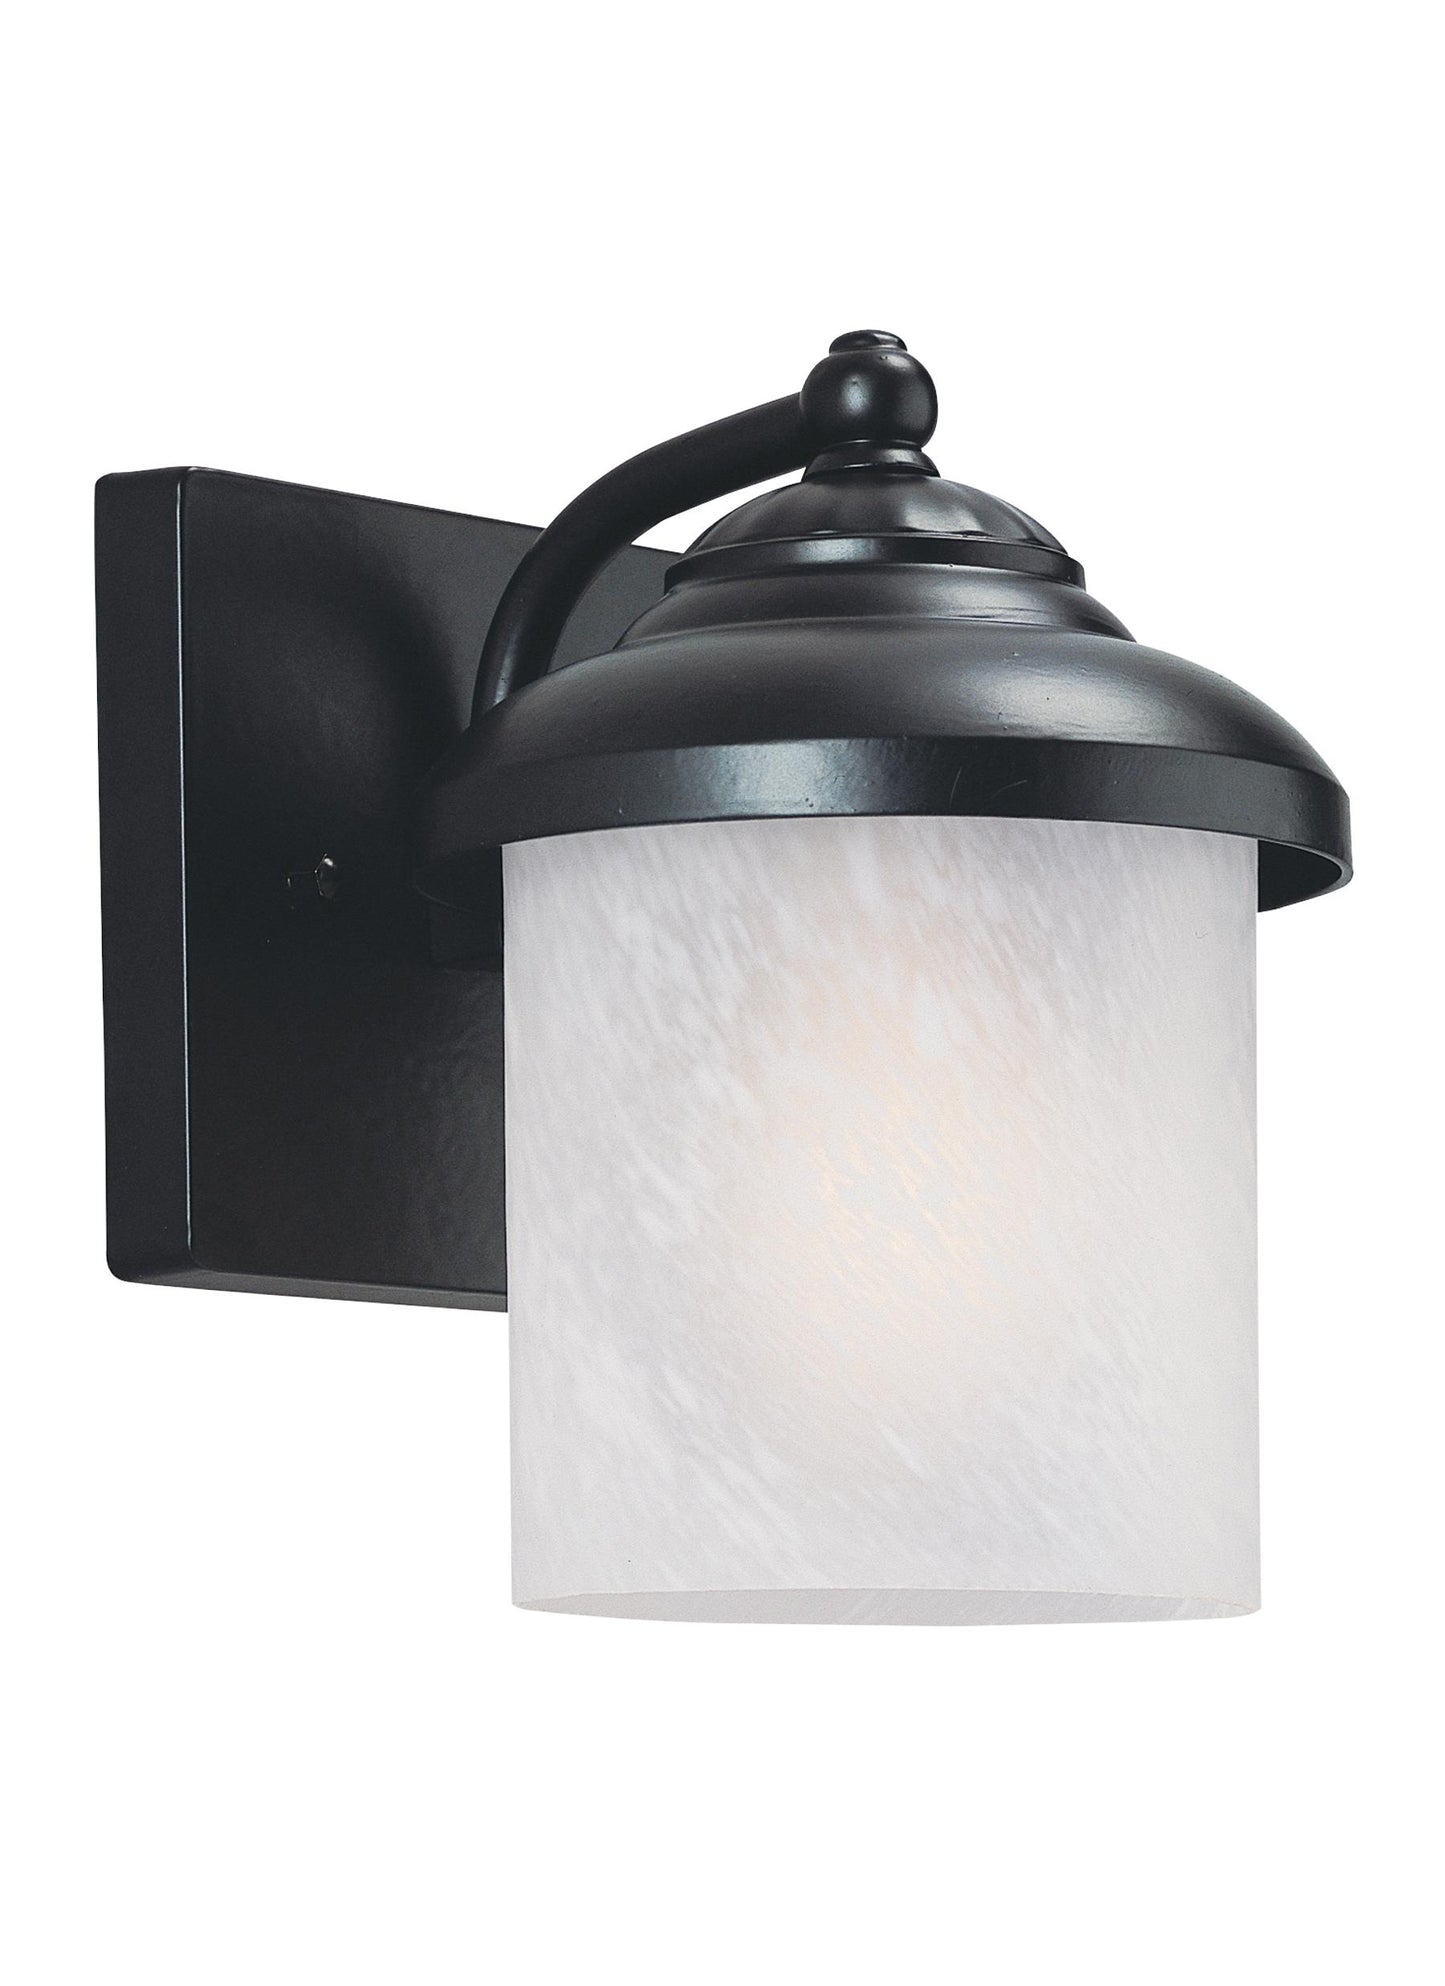 Yorktown transitional 1-light outdoor exterior small wall lantern sconce in black finish with swirled marbleize glass shade